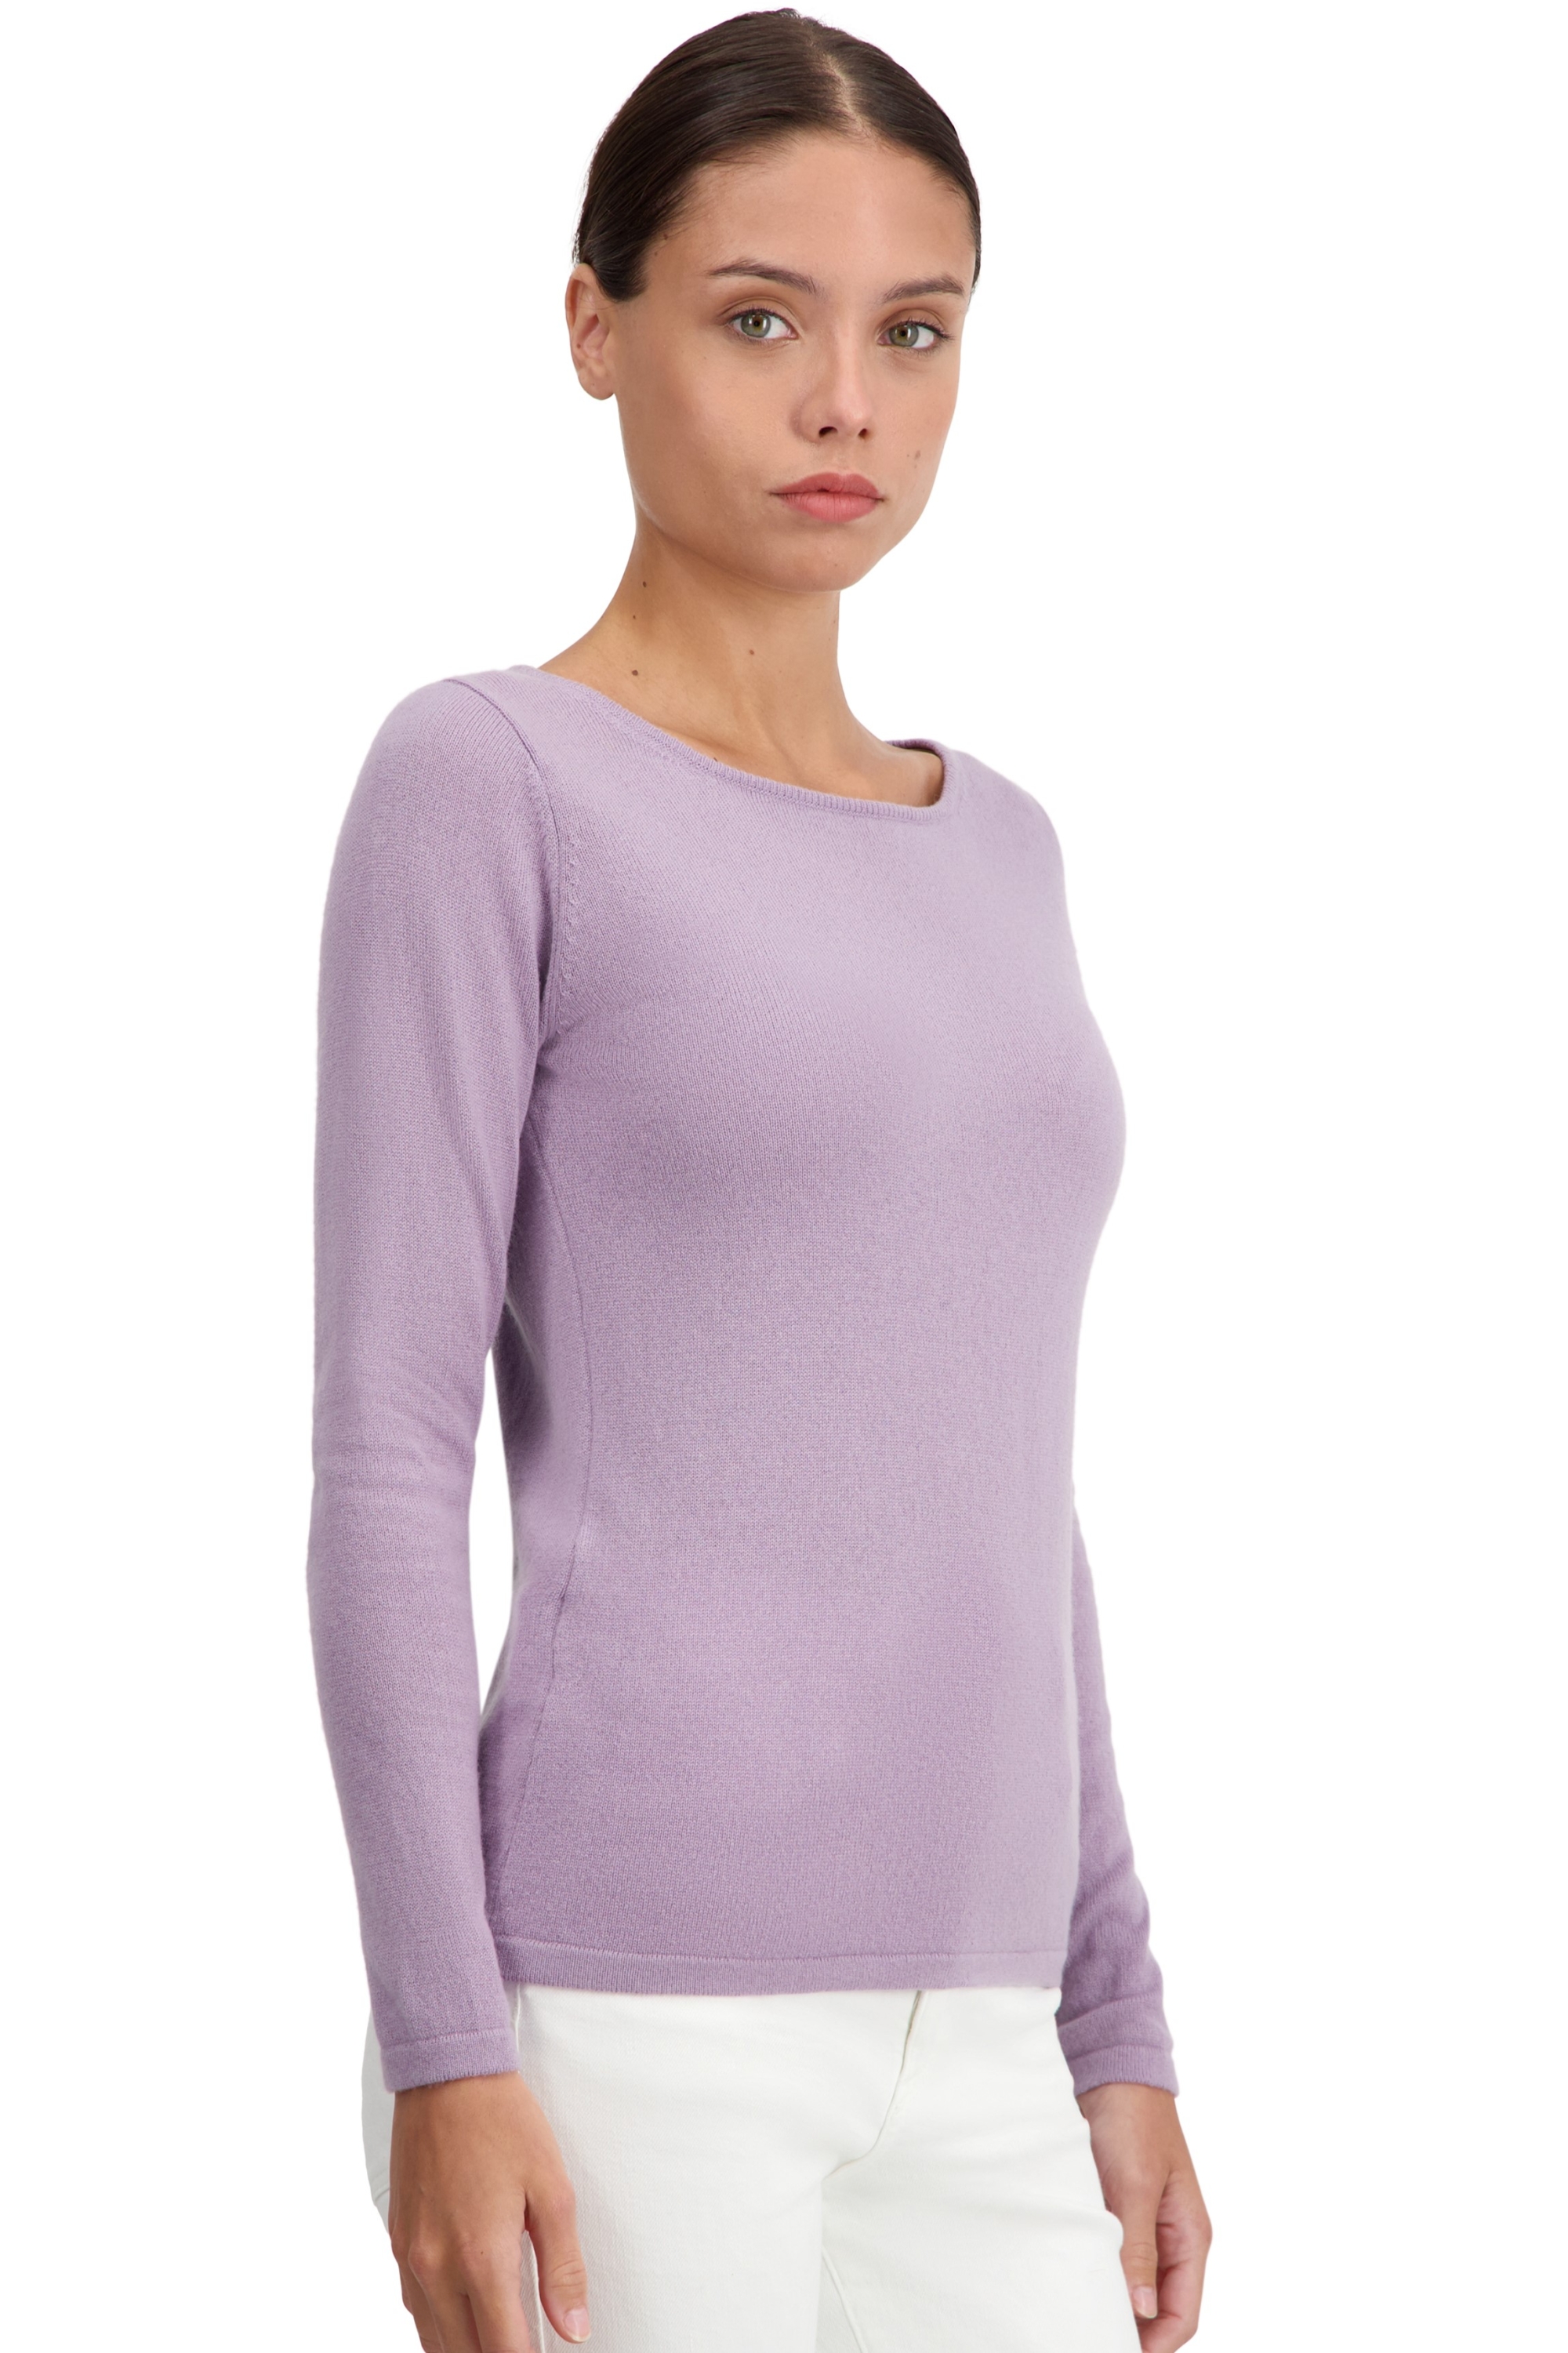 Cashmere ladies basic sweaters at low prices tennessy first vintage l